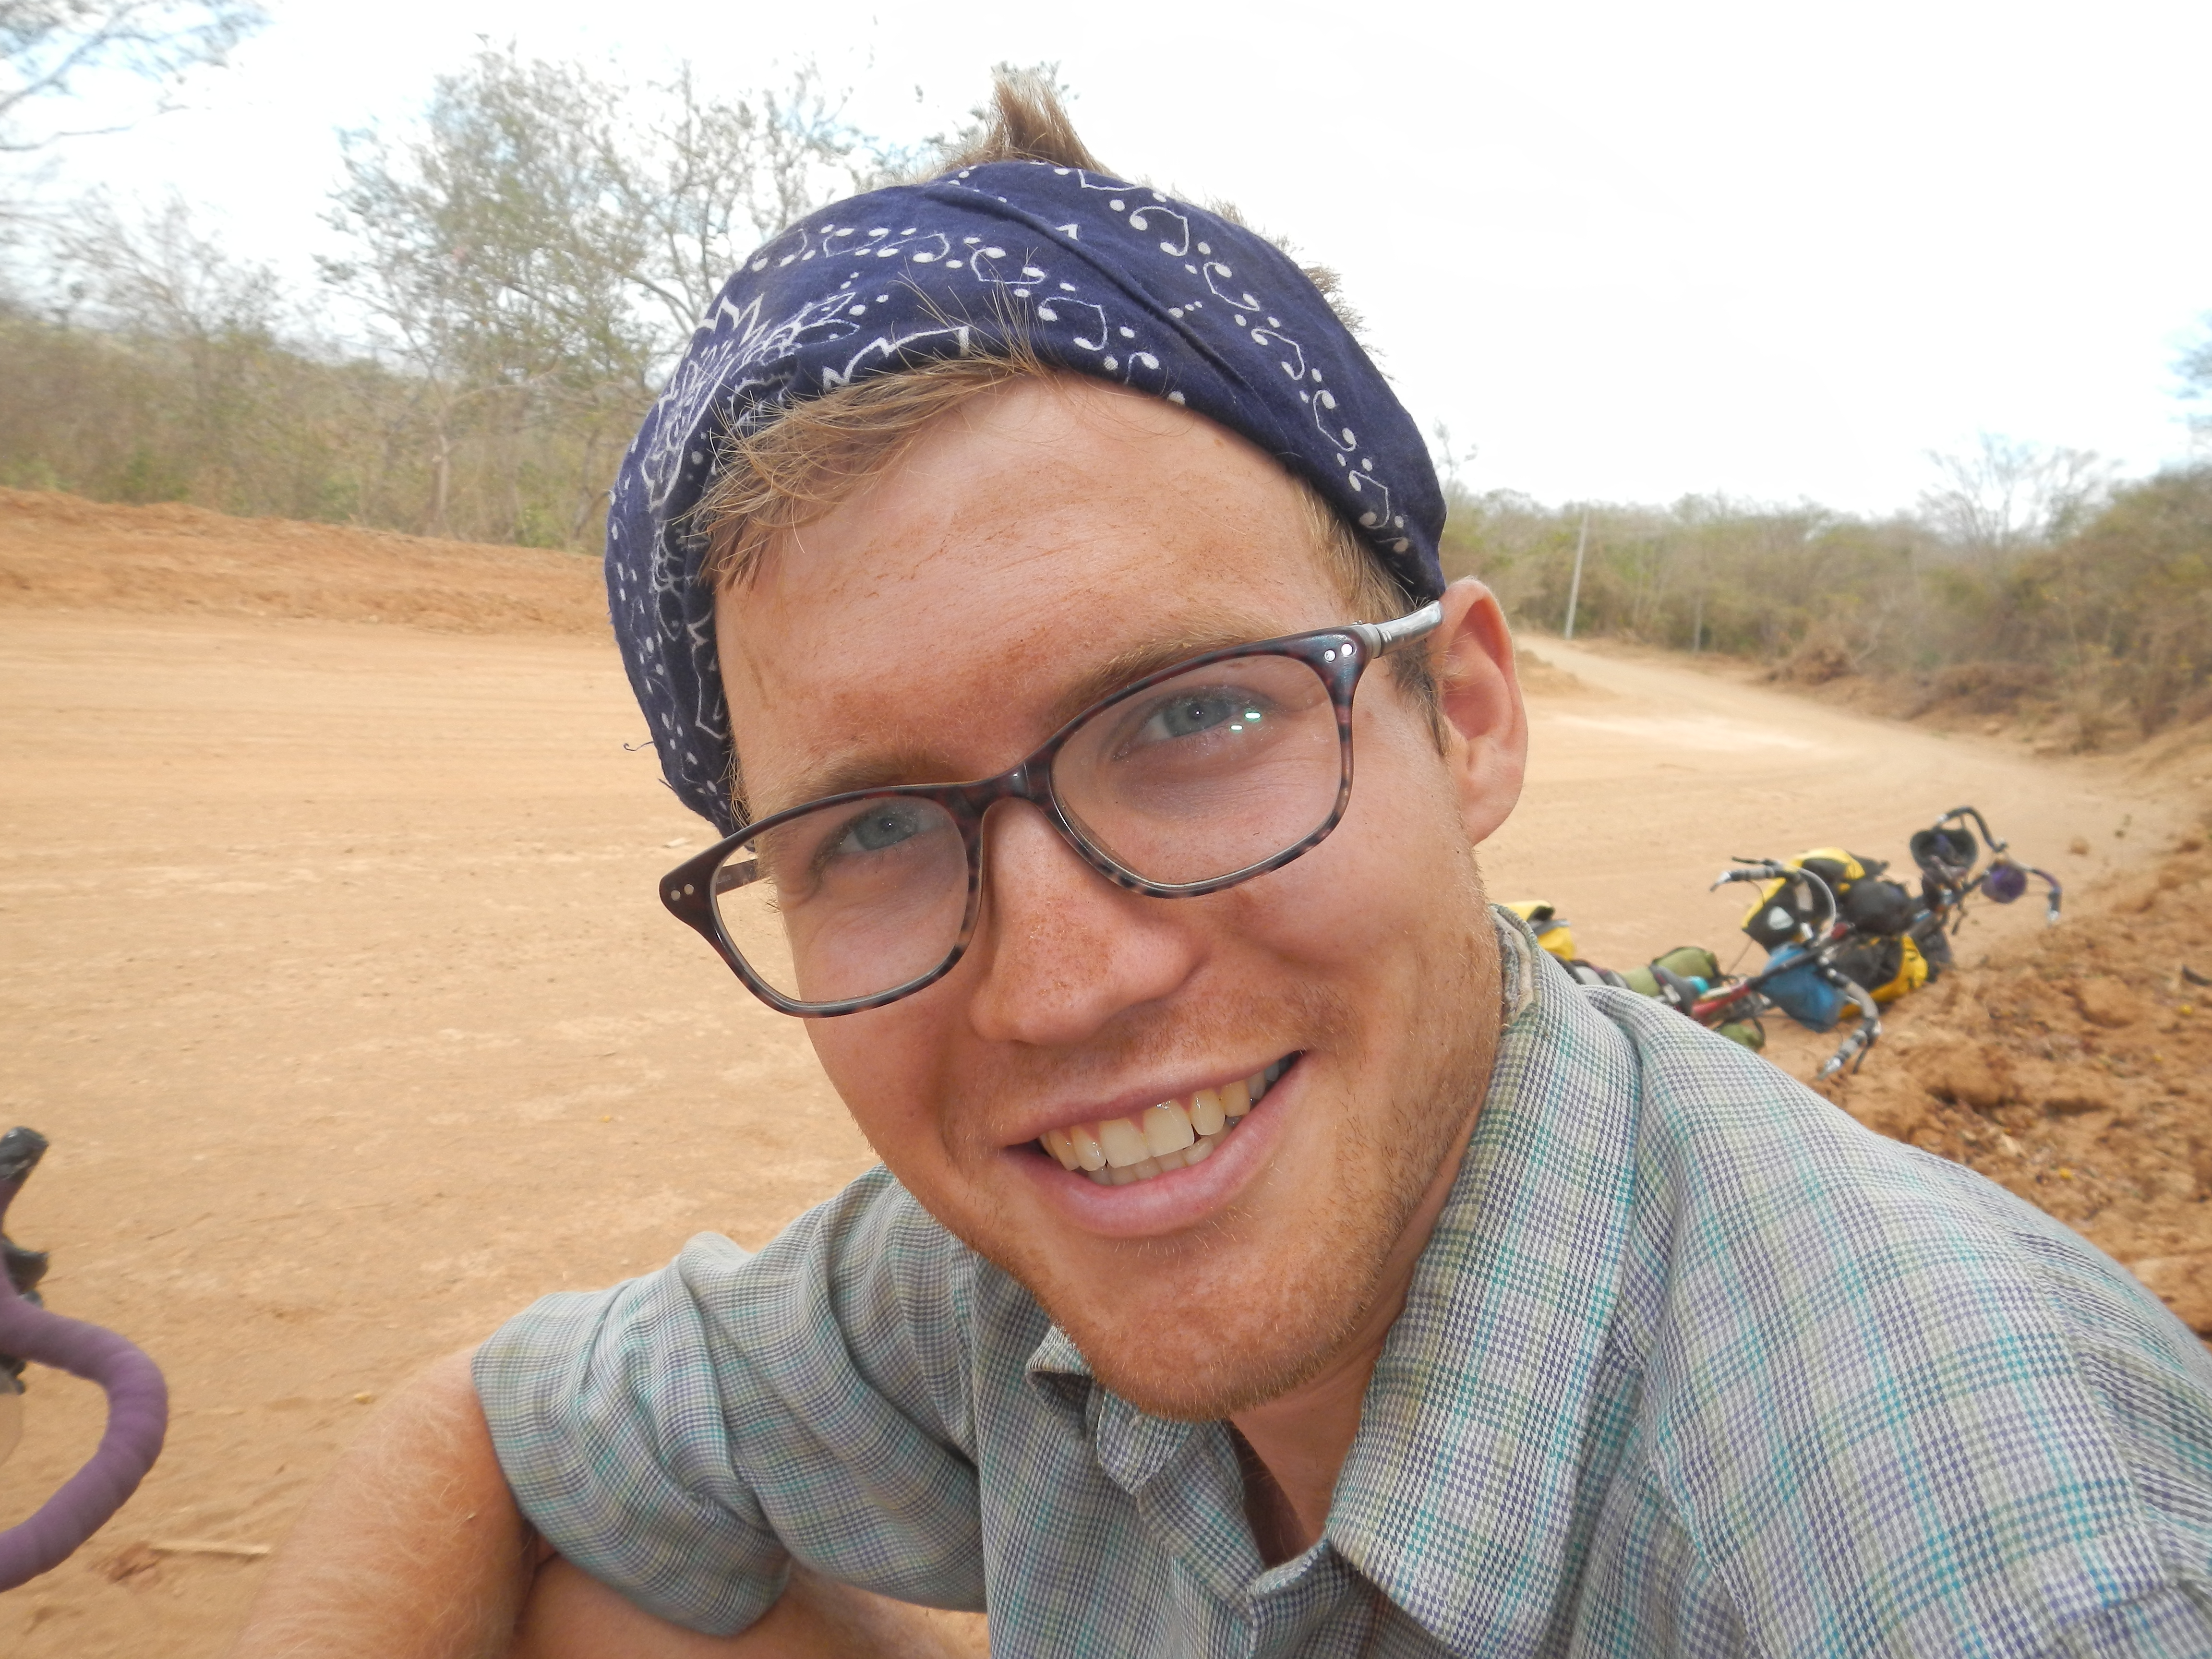 Close up portrait of Ventres-Pake smiling at the camera wearing a blue bandana as a headband and brown tortoiseshell glasses